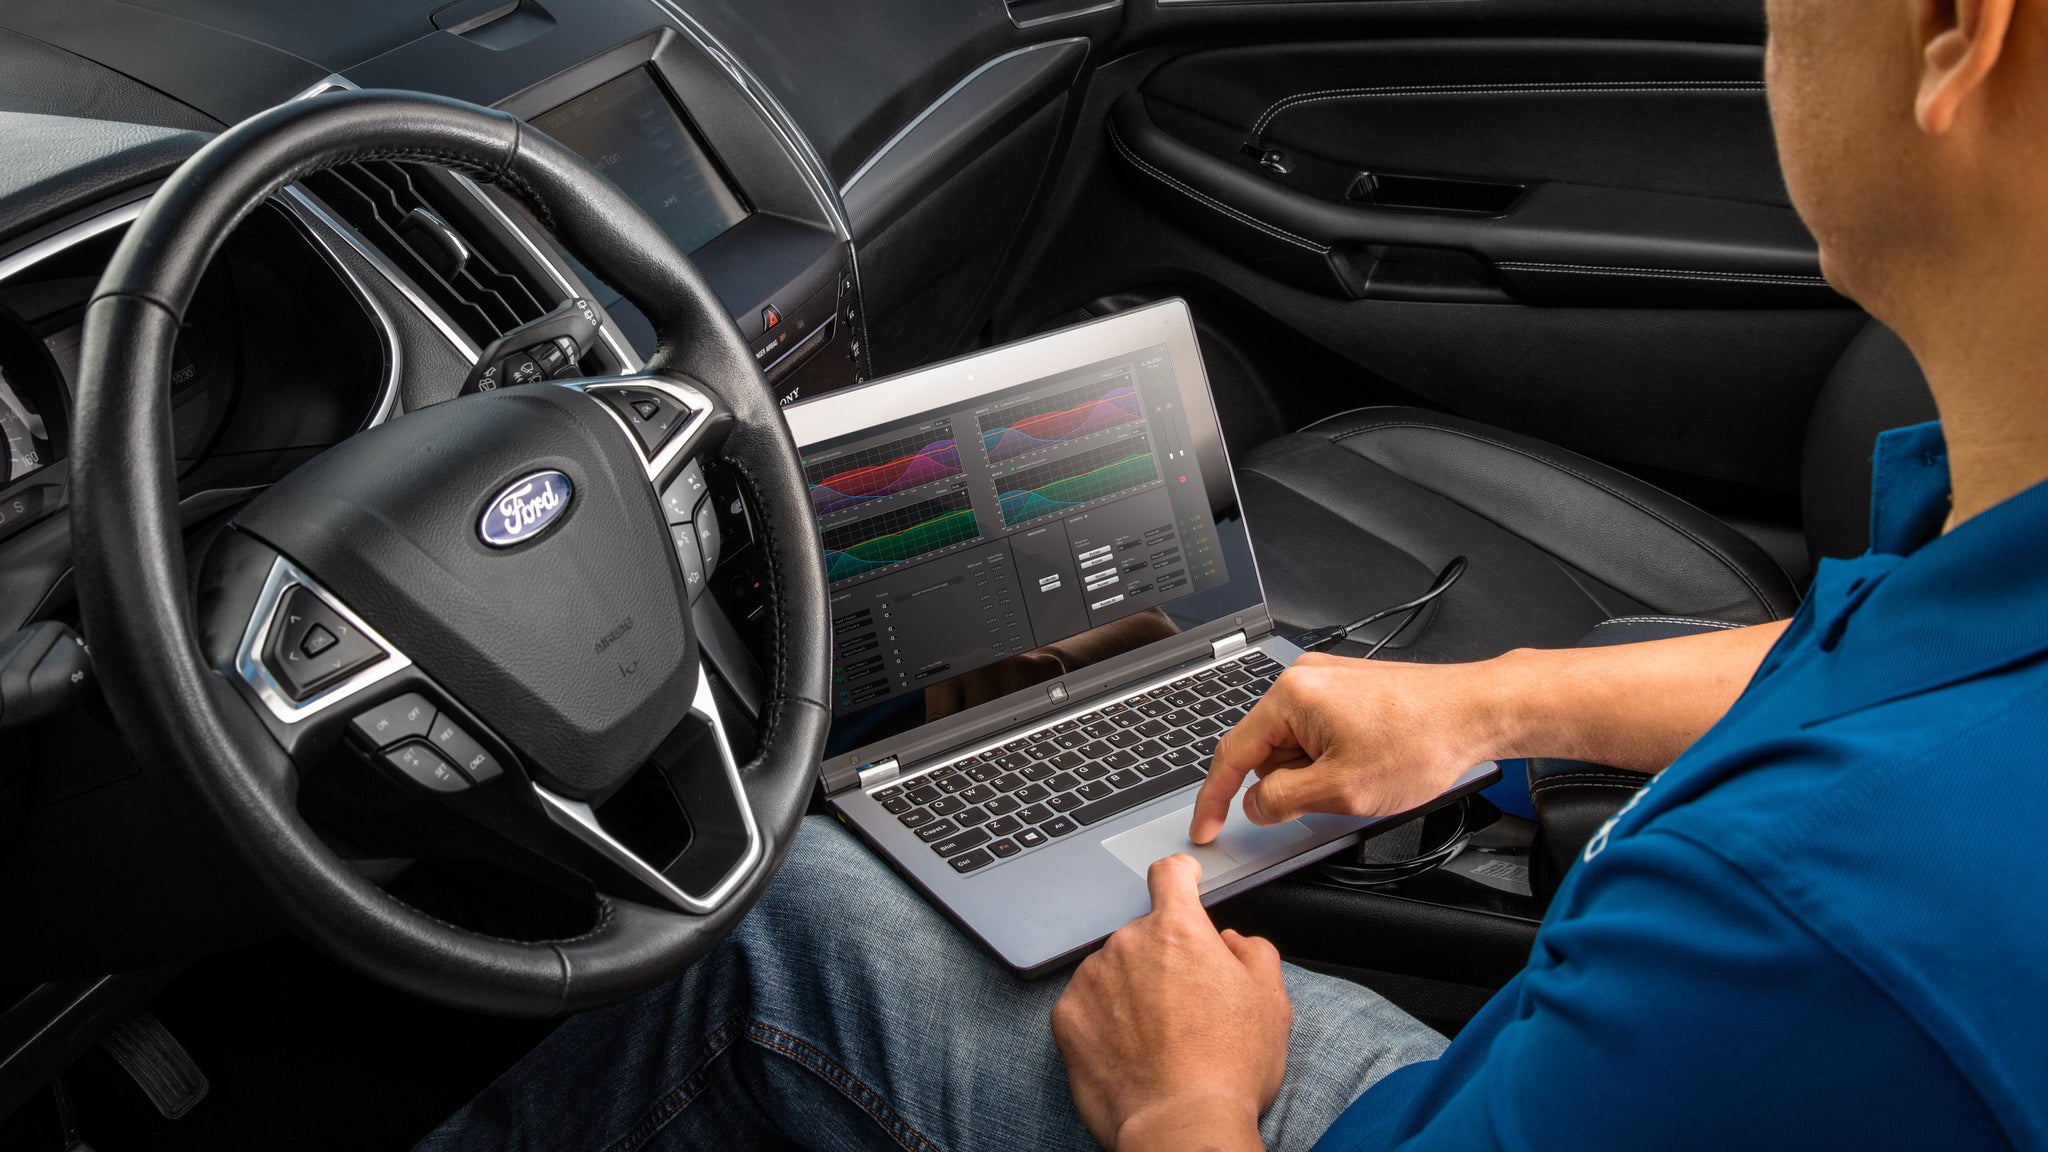 A technician using FiX EOM DSP integration with his laptop to adjust audio levels for a vehicle.